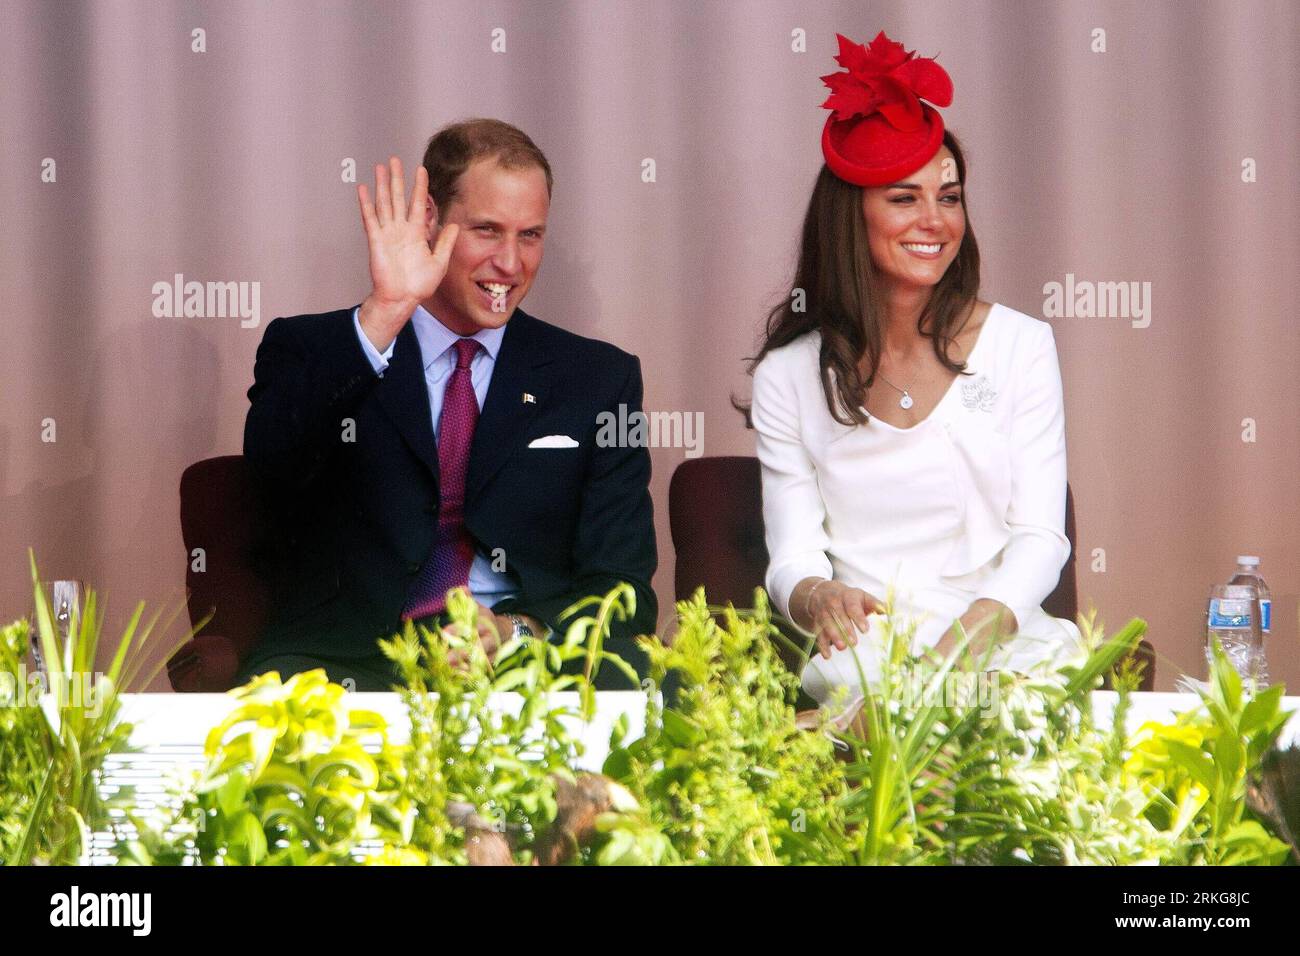 Bildnummer: 55565299  Datum: 01.07.2011  Copyright: imago/Xinhua (110702)-- OTTAWA, July 2, 2011 (Xinhua) -- Britain s Prince William and his wife Kate wave to the crowds during the 144th Canada Day celebrations on Parliament Hill in Ottawa, Canada, on July 1, 2011. The Royal couple is on a nine-day official visit to Canada, their first overseas trip since being married.(Xinhua/Christopher Pike)(zl) CANADA-CANADA DAY-CELEBRATION PUBLICATIONxNOTxINxCHN People Entertainment Adel GBR Königshaus Familie Frau Ehefrau Kate Ehemann Mann xda x0x premiumd Middleton 2011 quer   Catherine Duchess Cambrid Stock Photo